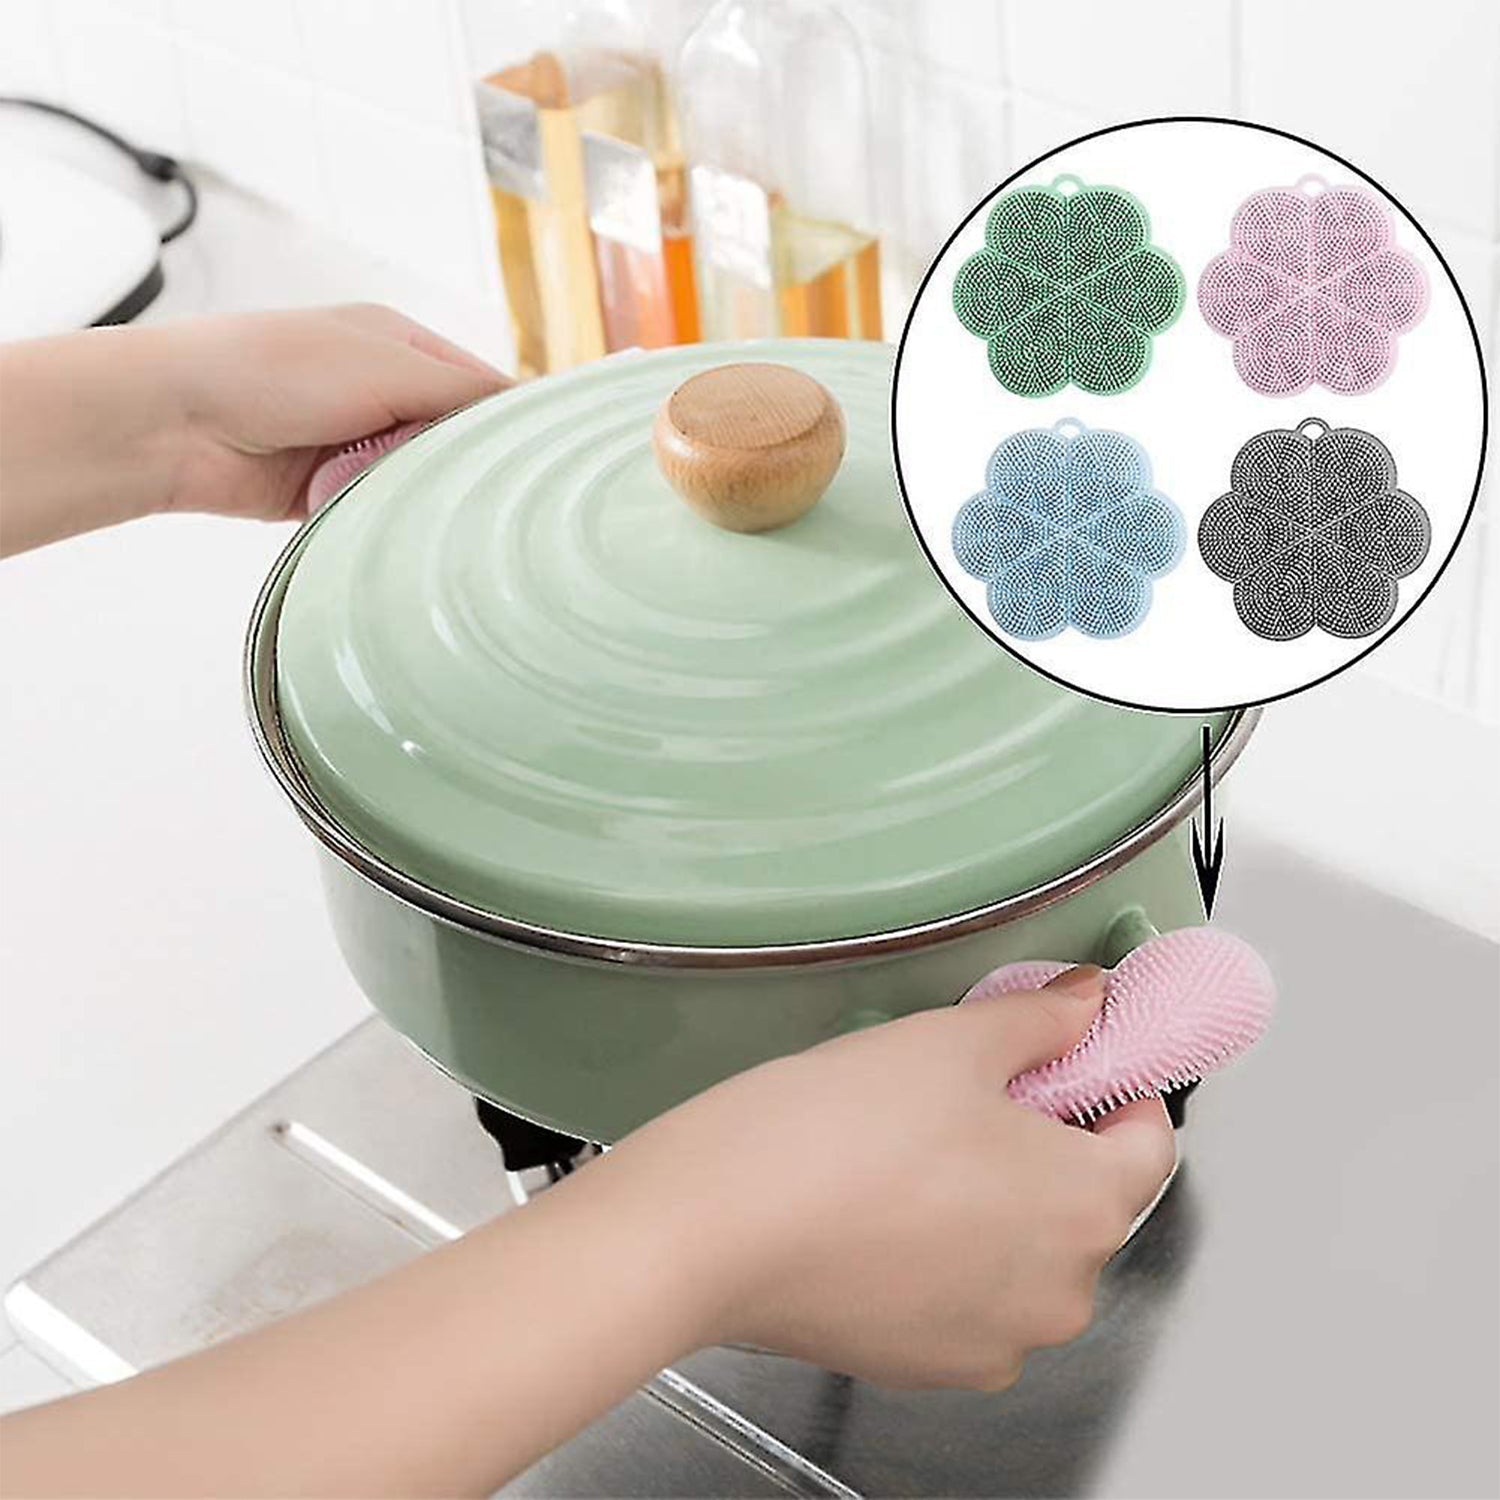 7215 Multifunction Silicone Sponge Dish Washing Kitchen Scrubber, Dishwashing Brush Silicone Kitchen Brush Flower Shape Cleaning Brushes for Home Restaurant Easy Cleaning Tool Heat-Resistant Mat Kitchen Home Gadgets (1 Pc)